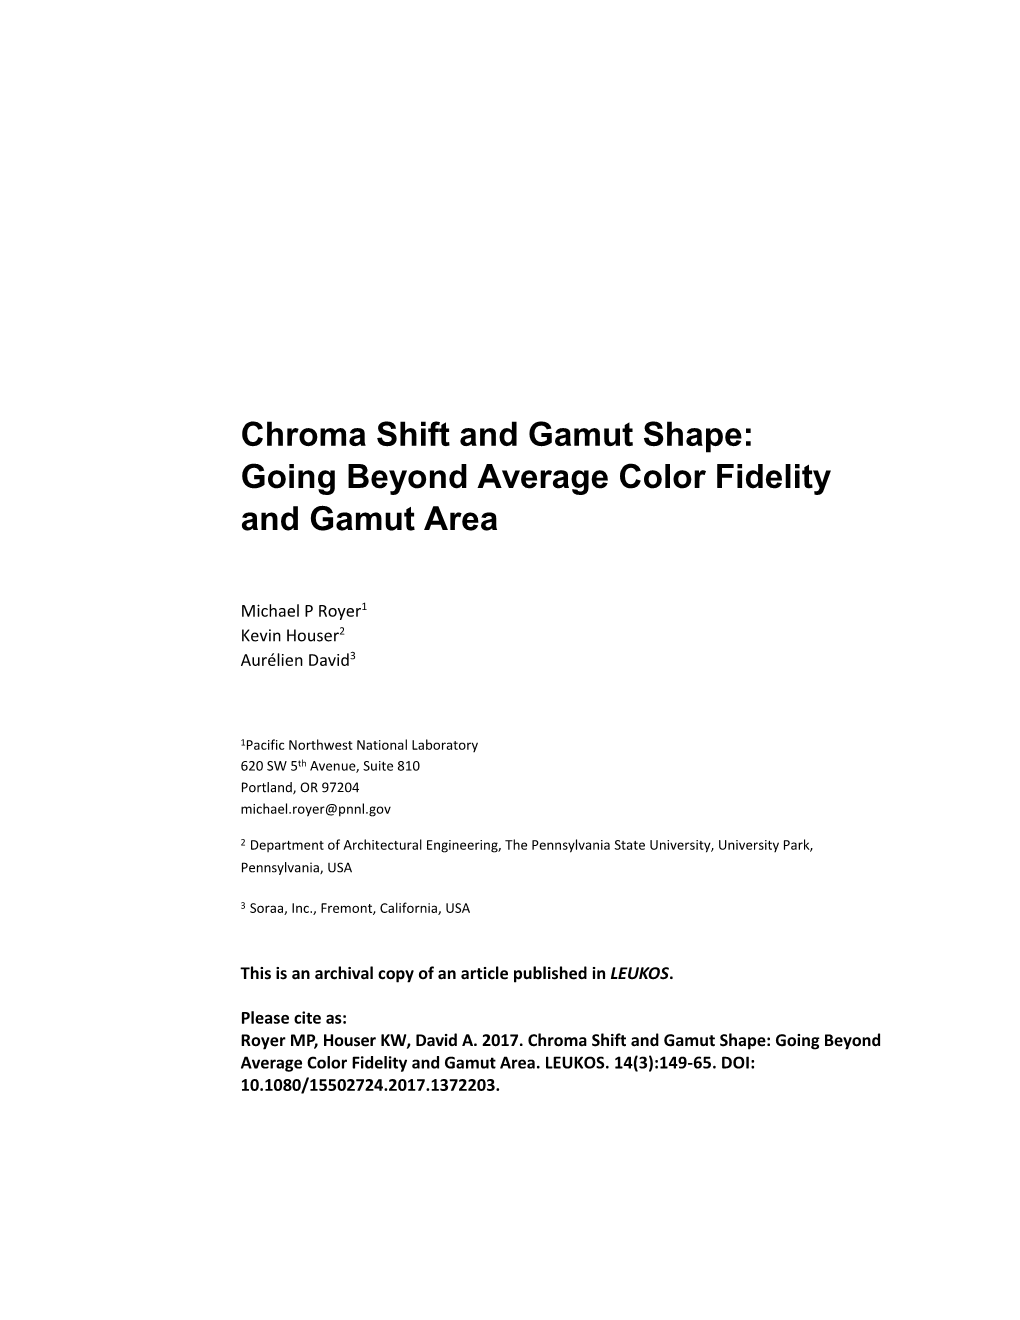 Chroma Shift and Gamut Shape: Going Beyond Average Color Fidelity and Gamut Area